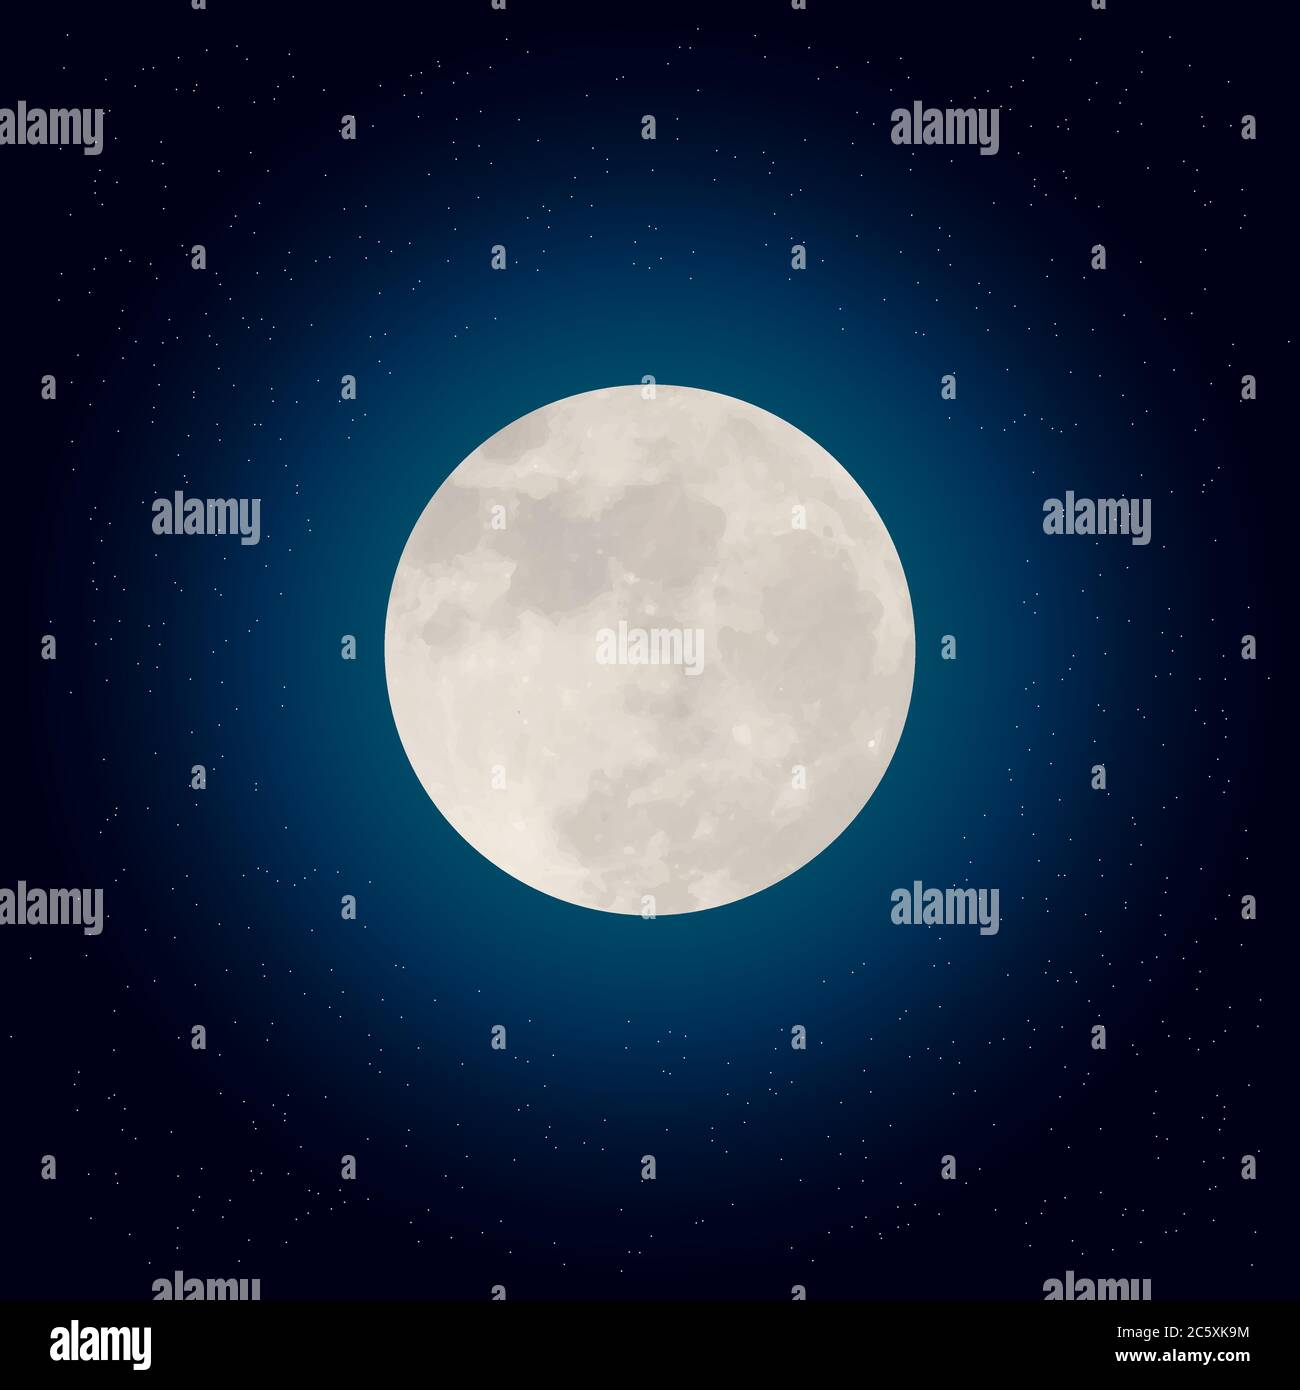 lunar eclipse in the night sky. realistic lunar eclipse vector illustration. Stock Vector